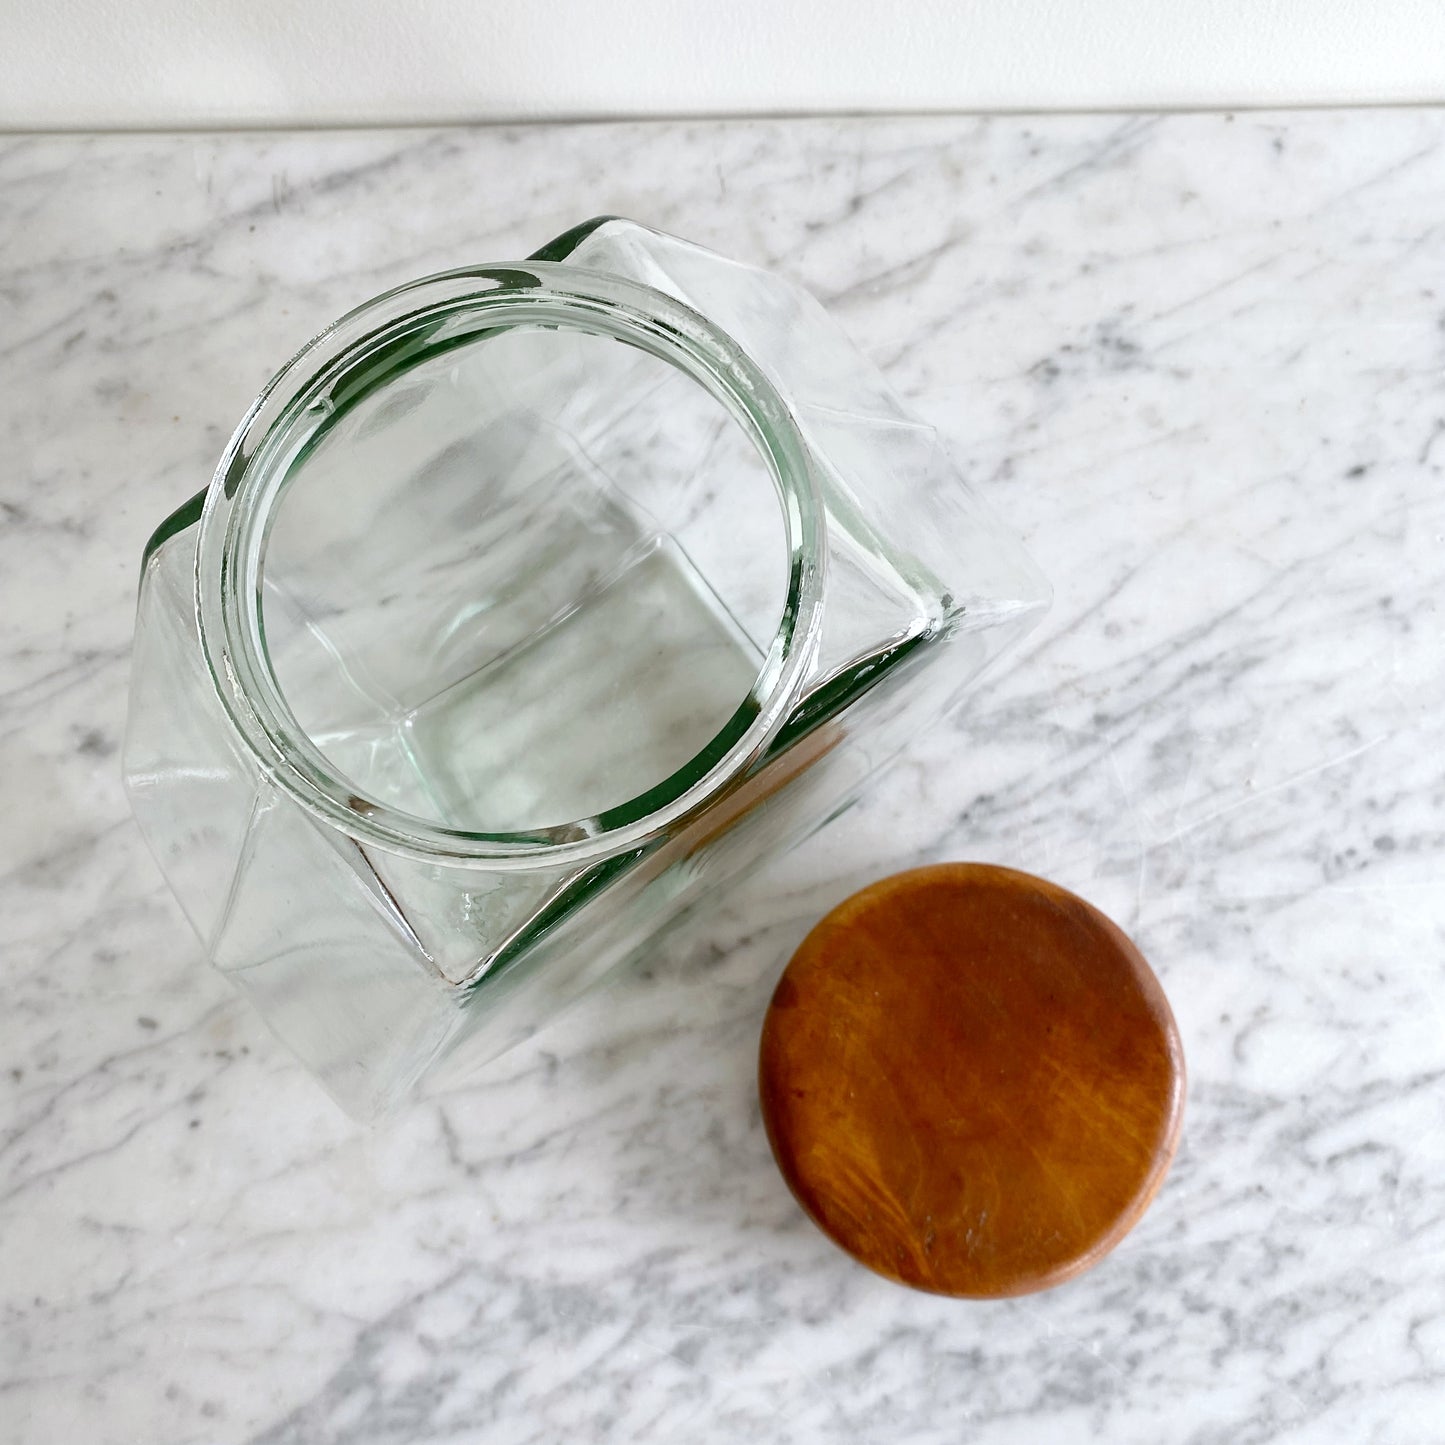 Vintage Glass Hexagon Container with Wood Lid